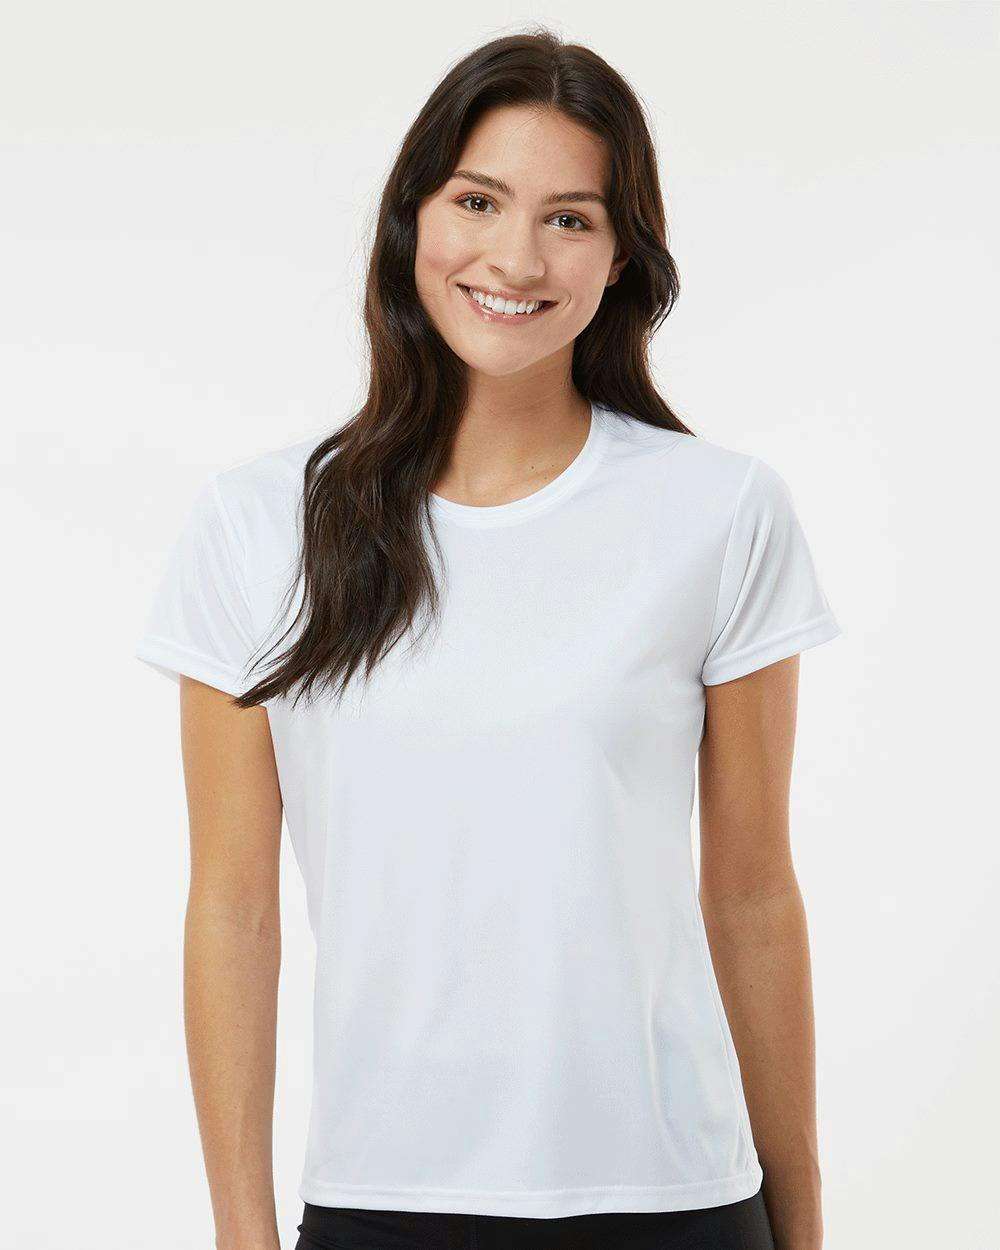 Image for Women’s Performance T-Shirt - 5600